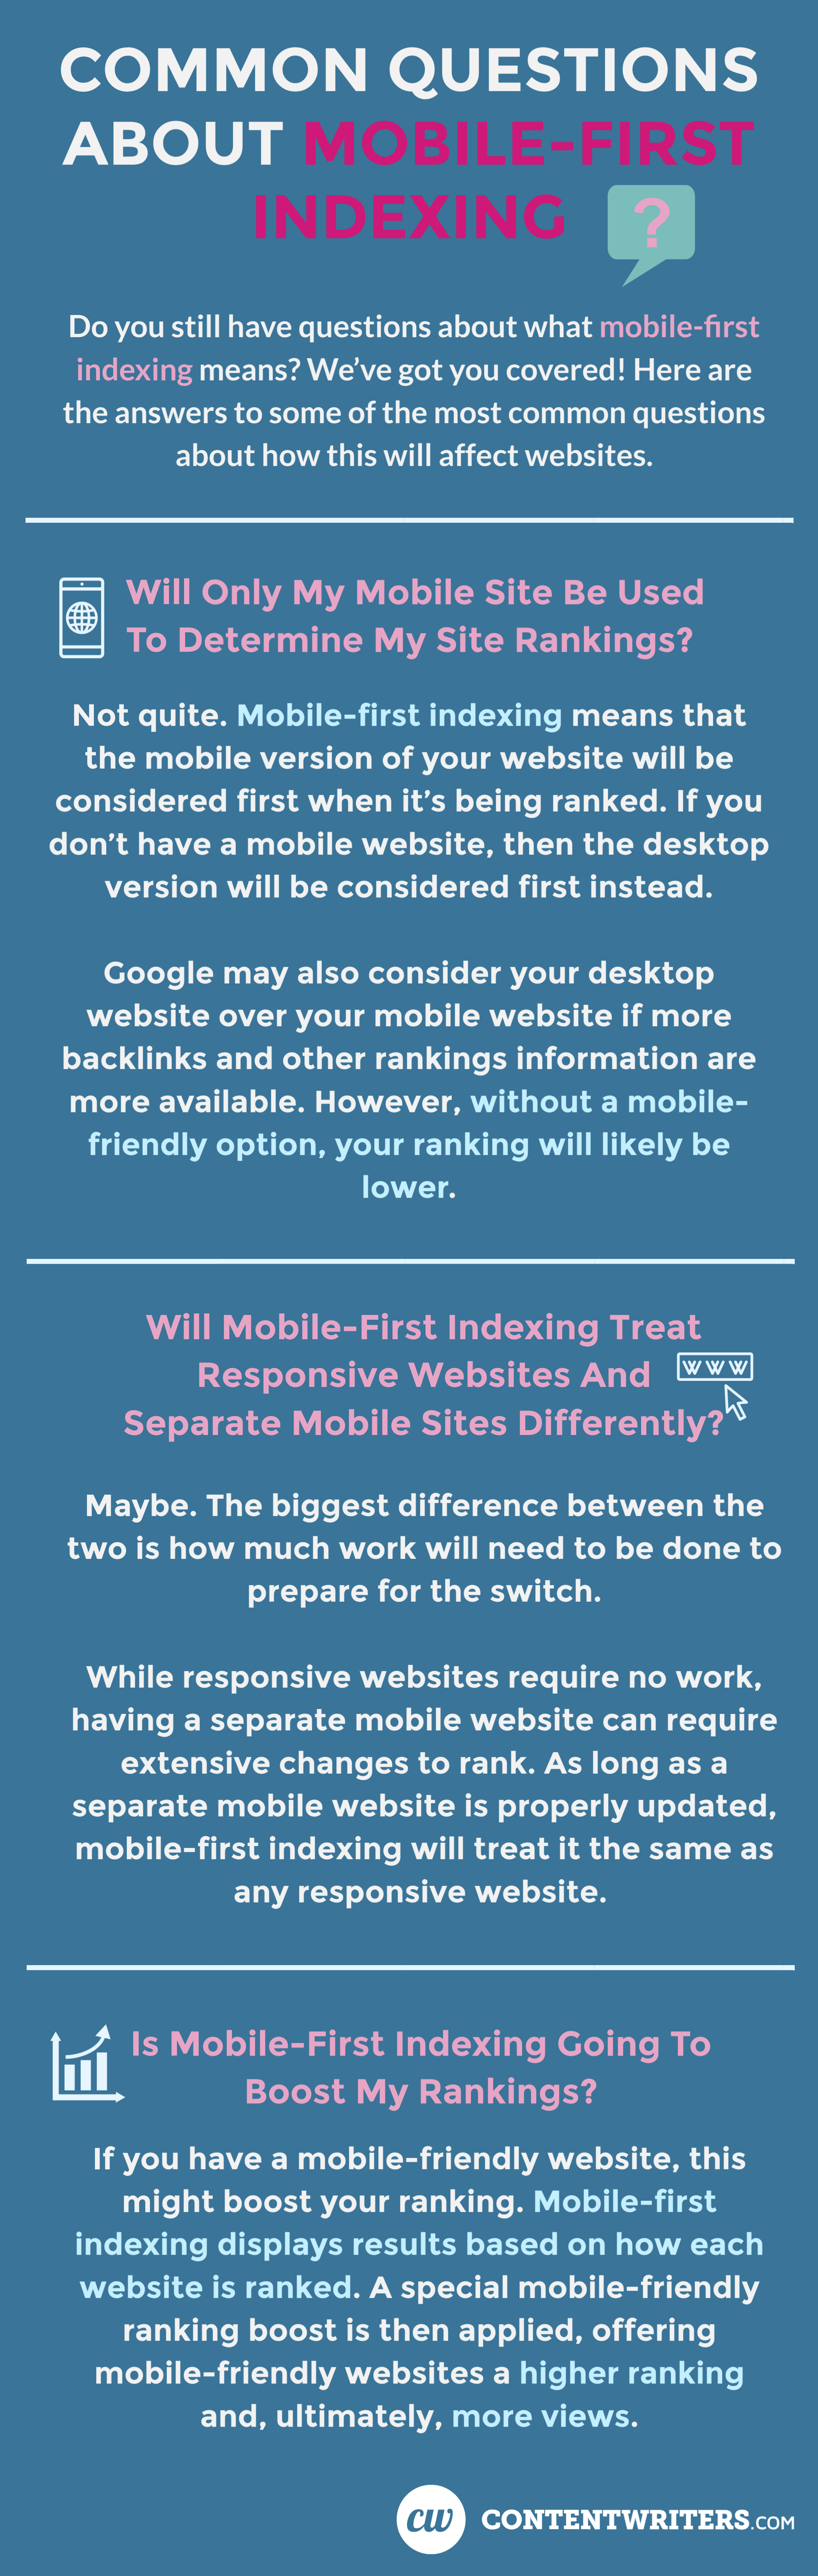 Mobile First Indexing FAQs ContentWriters

Common Questions About Mobile-First Indexing
Do you still have questions about what mobile-first indexing means? We’ve got you covered! Here are the answers to some of the most common questions about how this will affect their websites. 

Will Only My Mobile Site Be Used To Determine My Site Rankings?
Not quite. Mobile-first indexing means that the mobile version of your website will be considered first when it’s being ranked. If you don’t have a mobile website, then the desktop version will be considered first instead. Google may also consider your desktop website over your mobile website if more backlinks and other rankings information are more available. However, without a mobile-friendly option, your ranking will likely be lower. 

Will Mobile-First Indexing Treat Responsive Websites And Separate Mobile Sites Differently?
Maybe. The biggest difference between the two is how much work will need to be done to prepare for the switch. While responsive websites require no work, having a separate mobile website can require extensive changes to rank. As long as a separate mobile website is properly updated, mobile-first indexing will treat it the same as any responsive website. 

Is Mobile-First Indexing Going To Boost My Rankings?
If you have a mobile-friendly website, this might boost your ranking. Mobile-first indexing displays results based on how each website is ranked. A special mobile-friendly ranking boost is then applied, offering mobile-friendly websites a higher ranking and, ultimately, more views. 